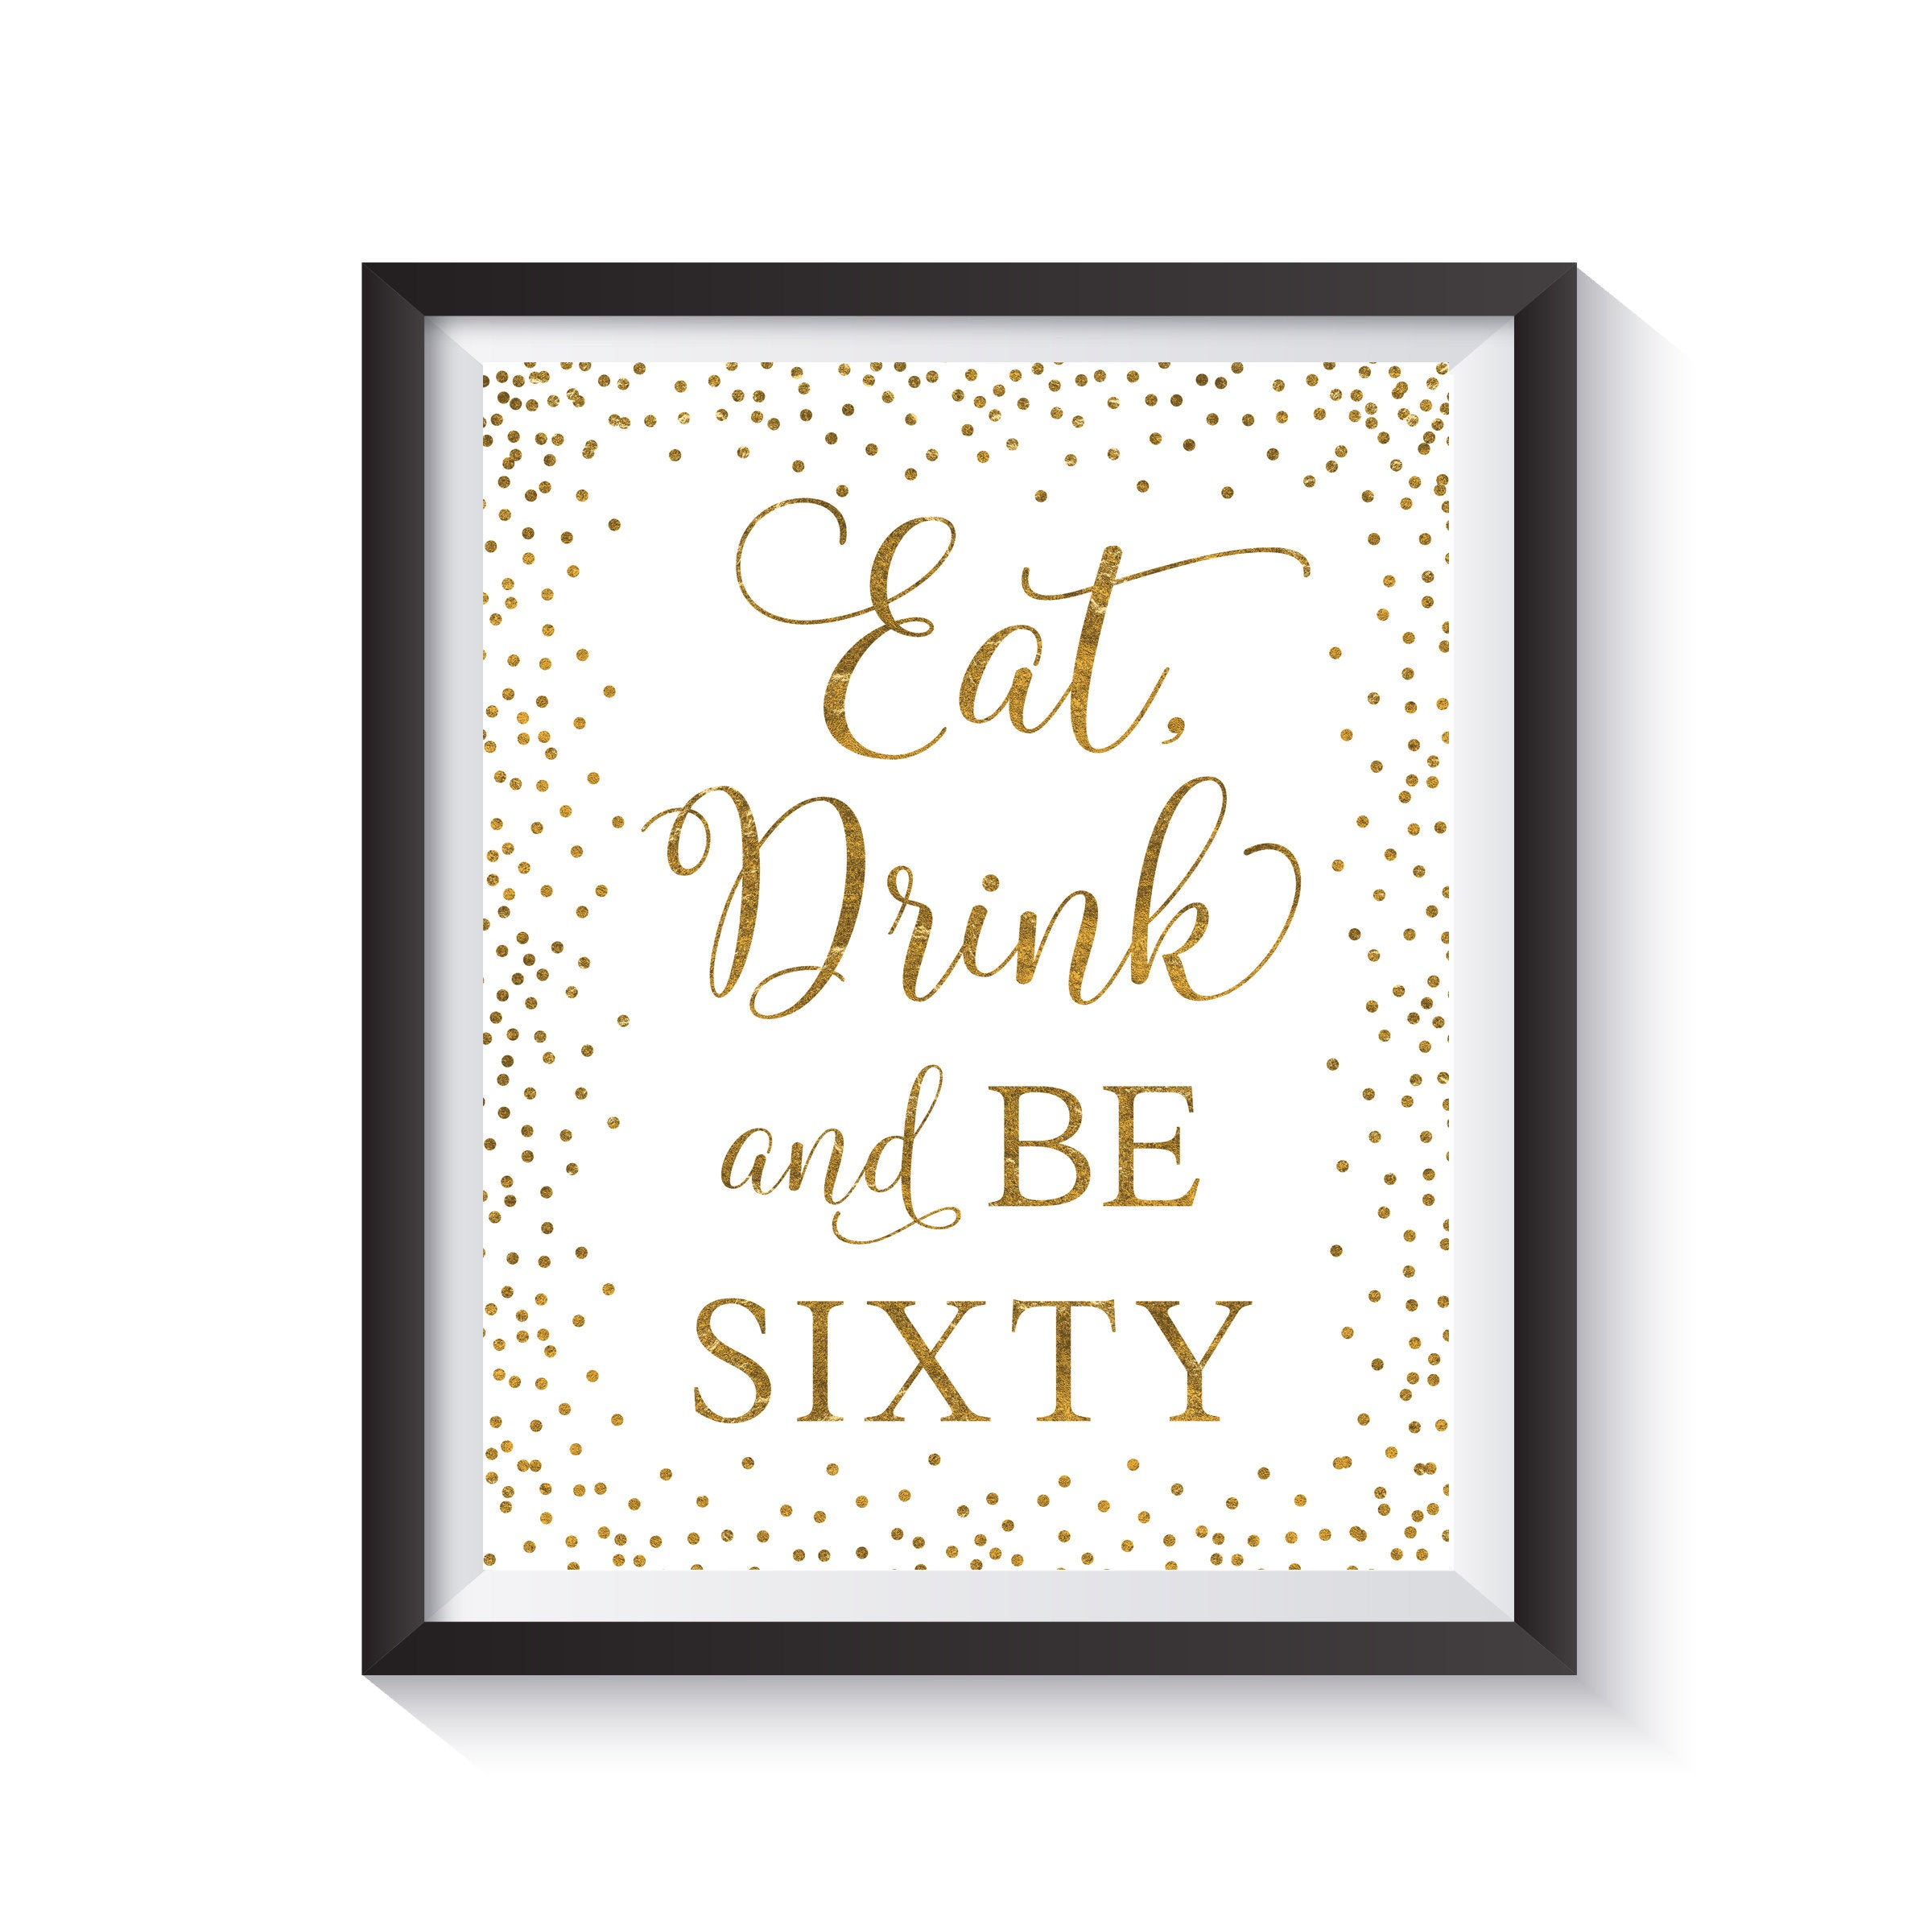 60 Birthday Card Ideas Eat Drink And Be Sixty 60th Birthday Sign Gold Glitter Confetti 60th Anniversary Sign Birthday Party Ideas Birthday Decorations